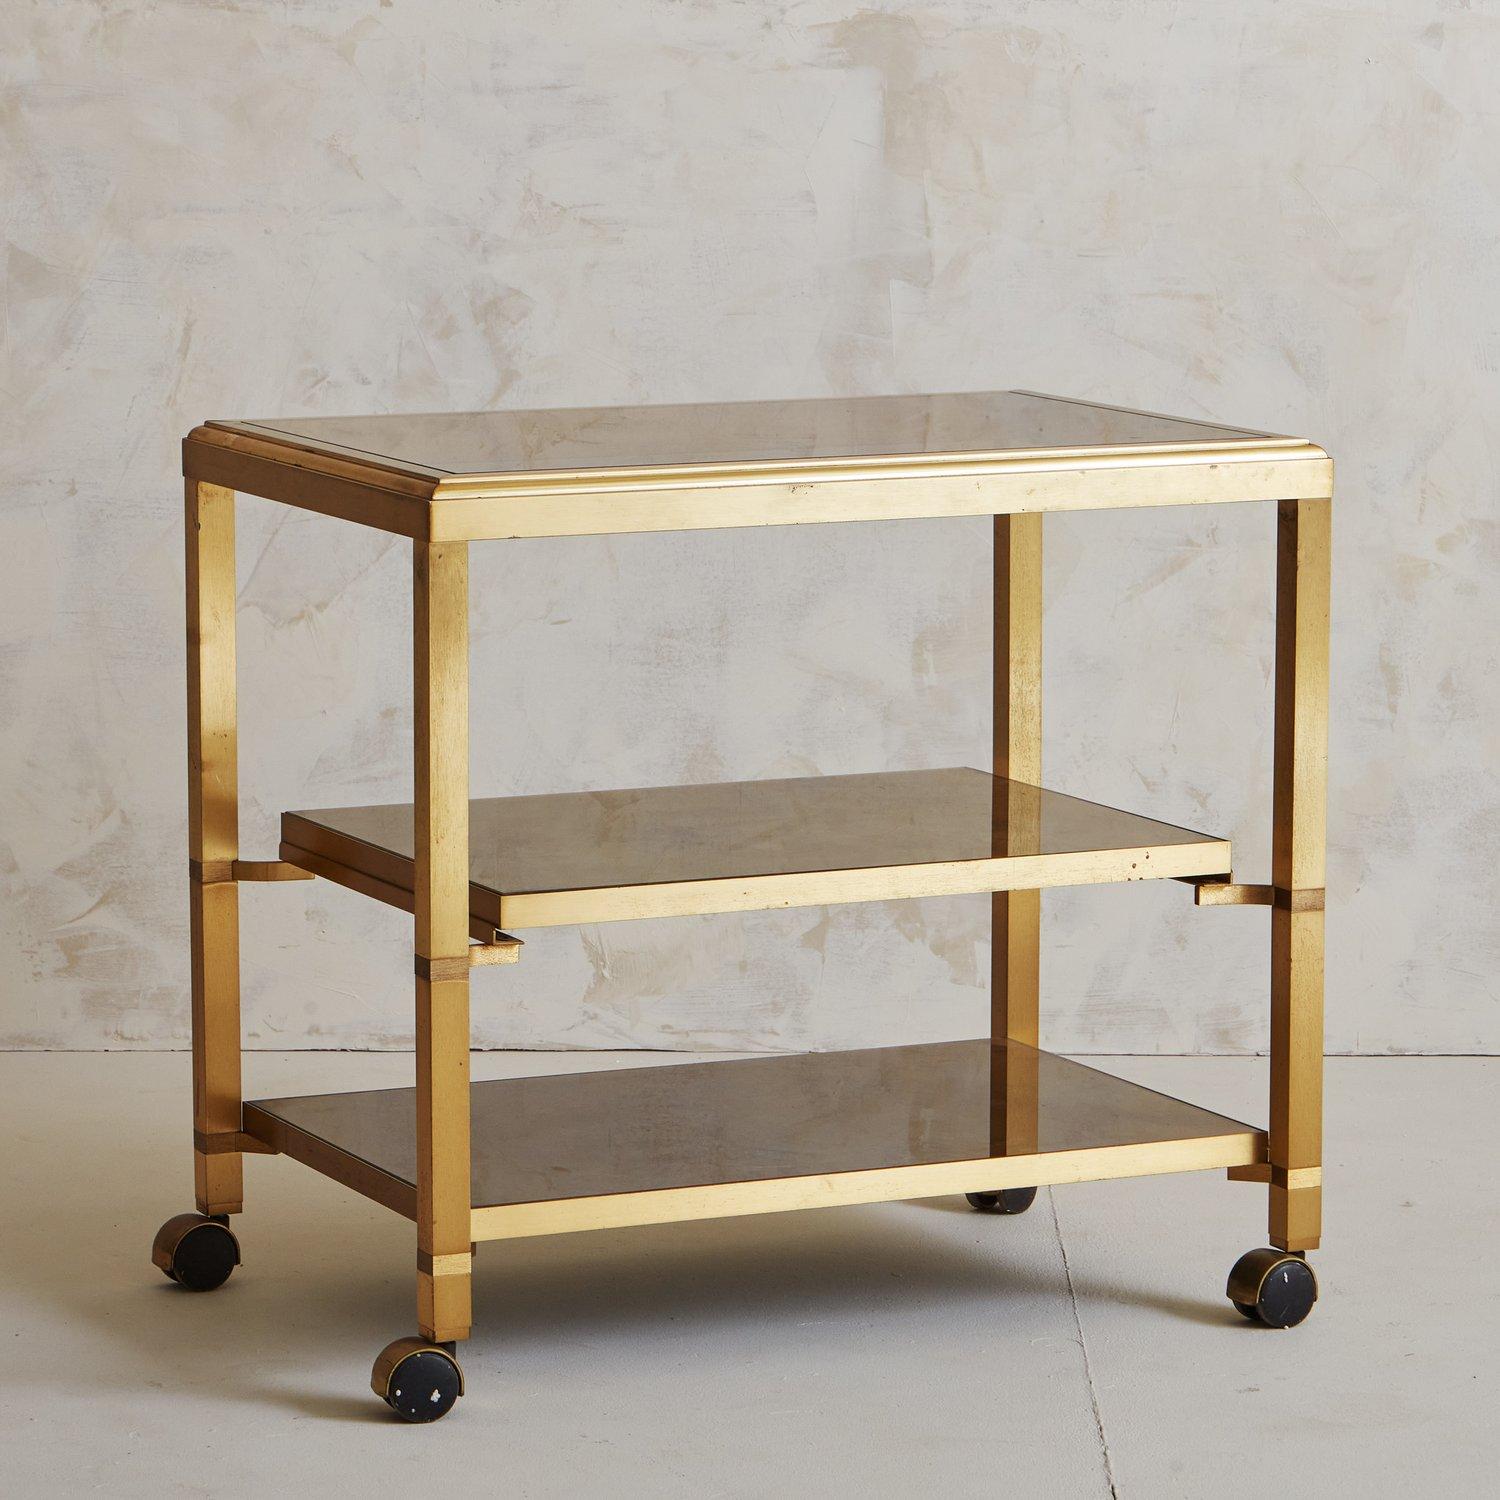 An elegant vintage three-tier patinated brass bar cart by Guy Lefevre. This piece has a smoked glass top and two back-painted glass shelves. This beauty is on wheels and the second shelf slides outwards for easy accessibility. We love the sleek